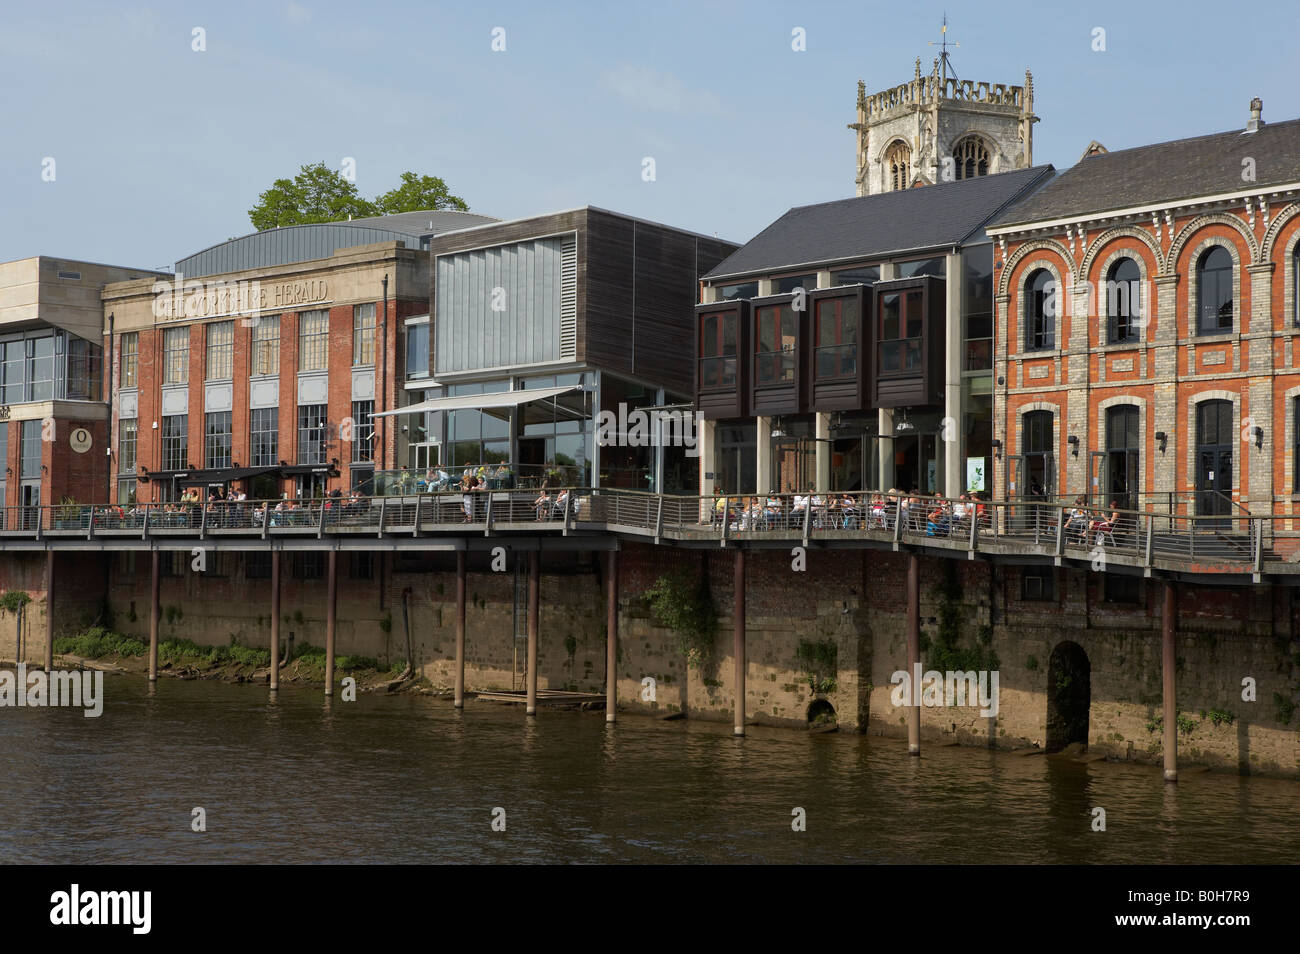 PEOPLE EATING DRINKING AND RELAXING AT CLUBS PUBS BARS AND RESTAURANTS NEXT TO RIVER OUSE YORK CITY SUMMER Stock Photo